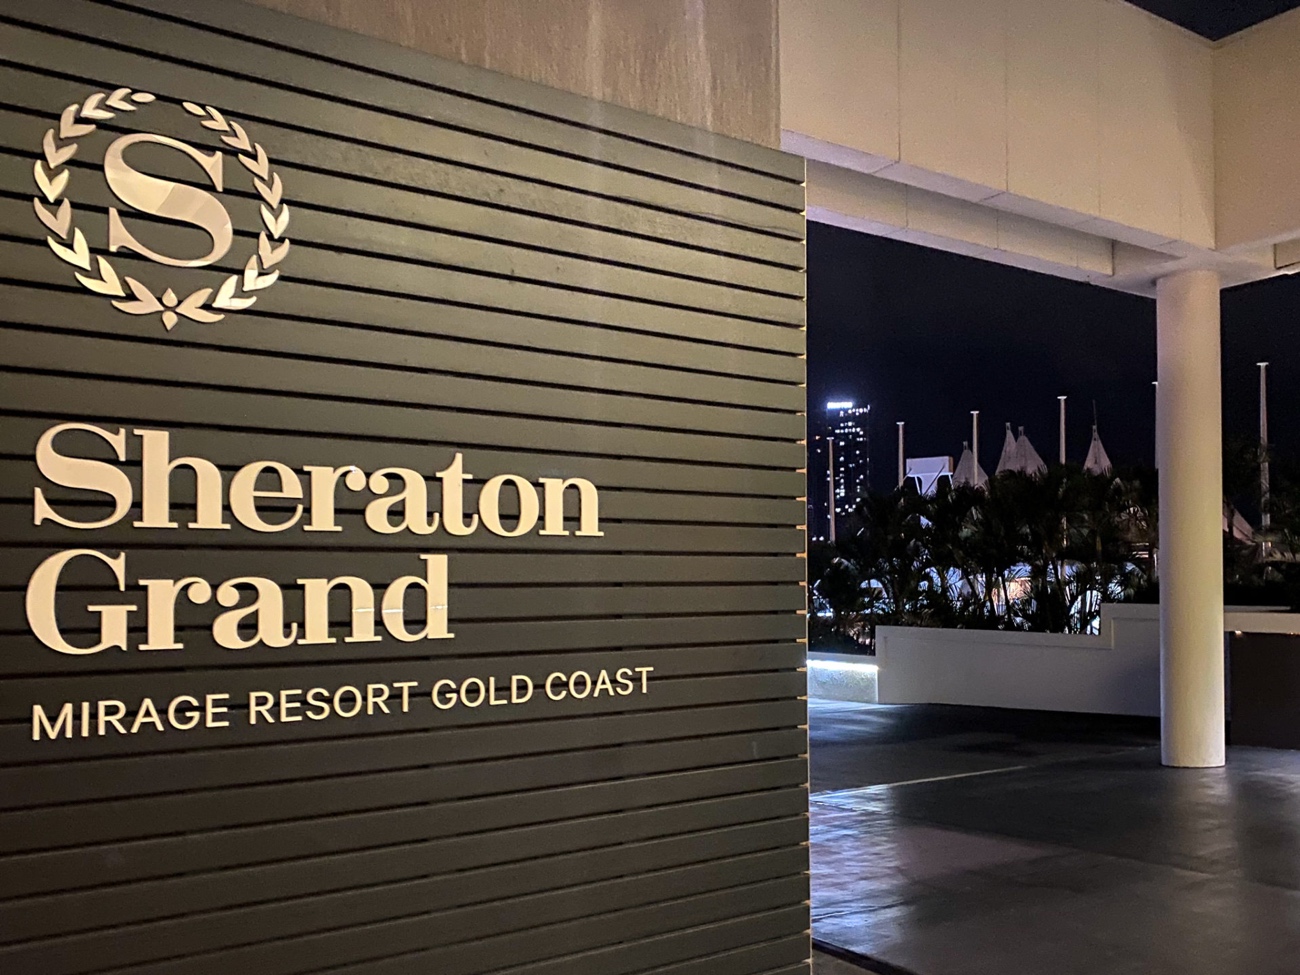 Star Entertainment want to sell Sheraton Grand Mirage Resort to pay fines